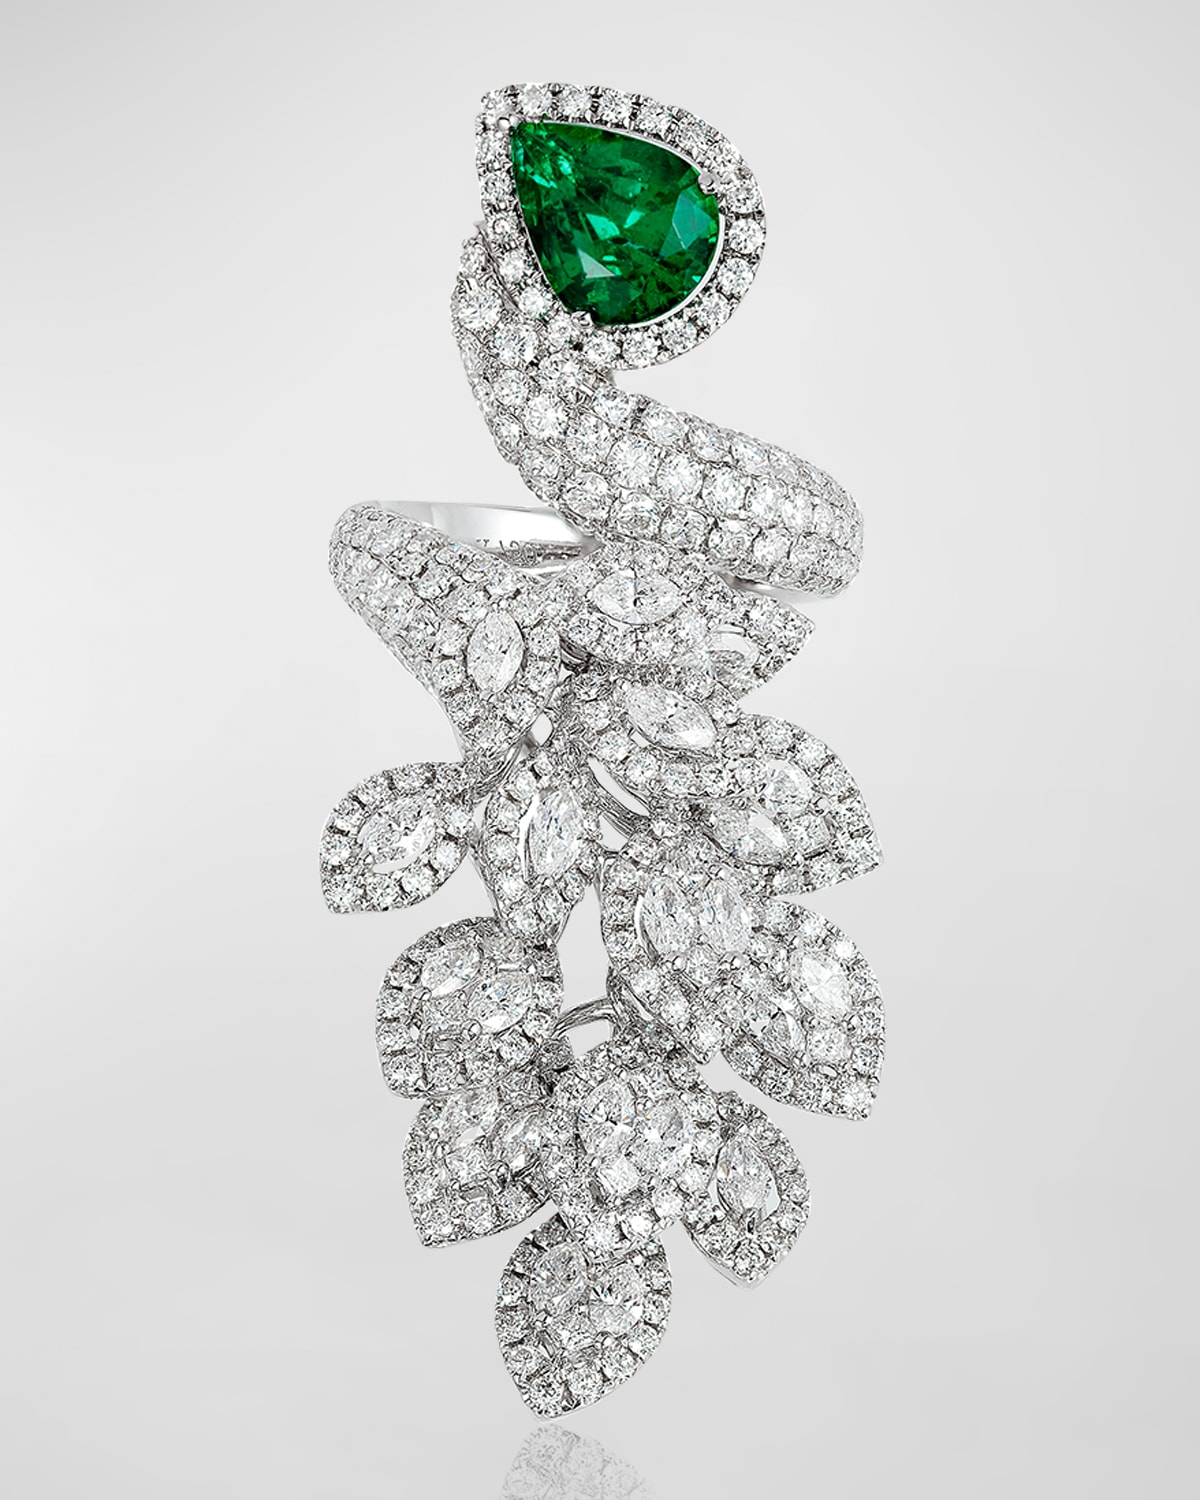 Andreoli White Gold Pear Emerald Ring with Diamonds